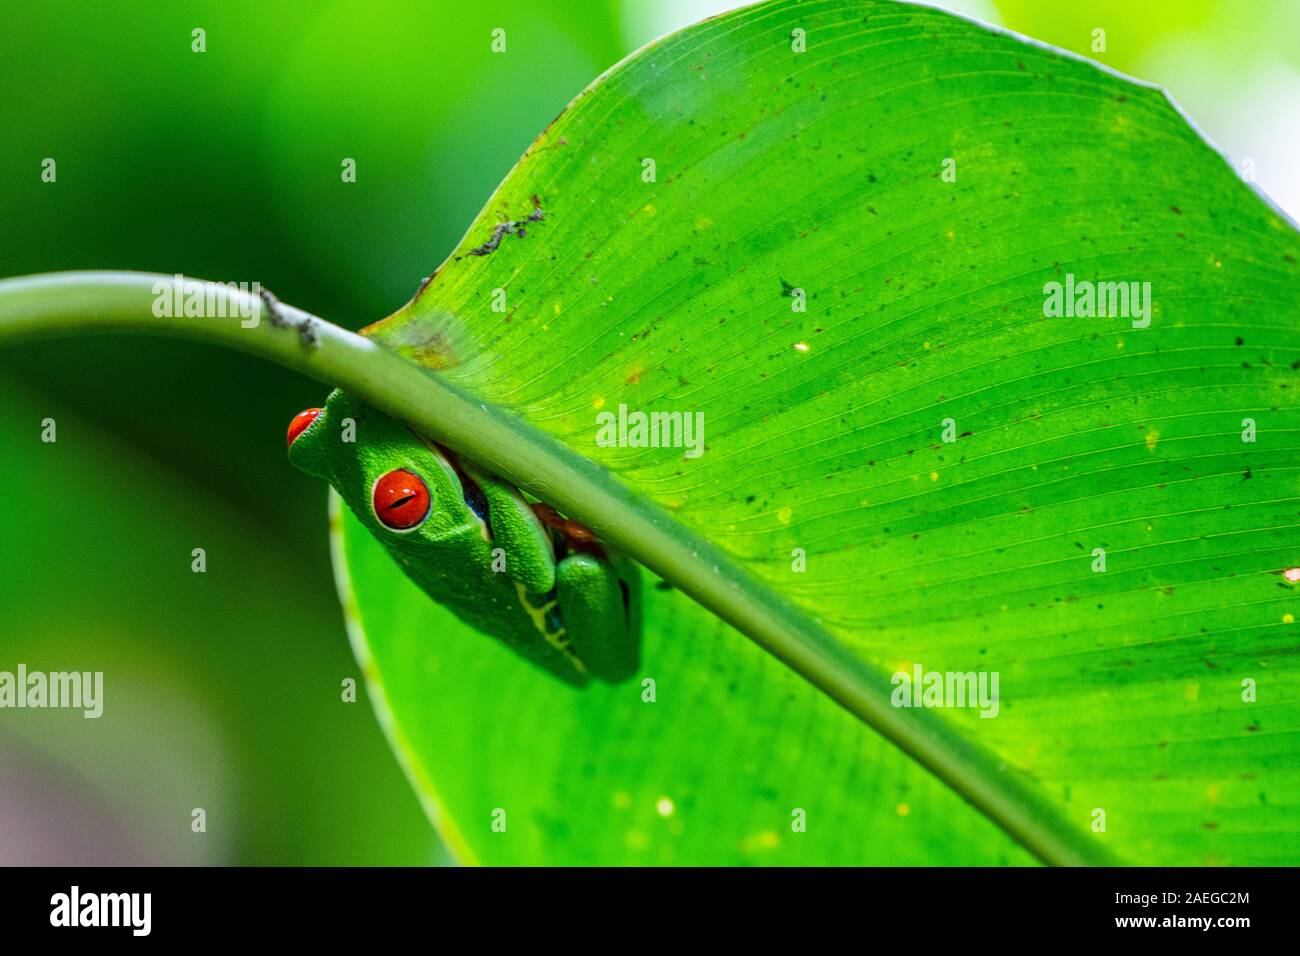 Red-eyed Treefrog (Agalychnis callidryas) in Costa Rica rainforest. This frog is found in the tropical rainforests of central America, where it lives Stock Photo